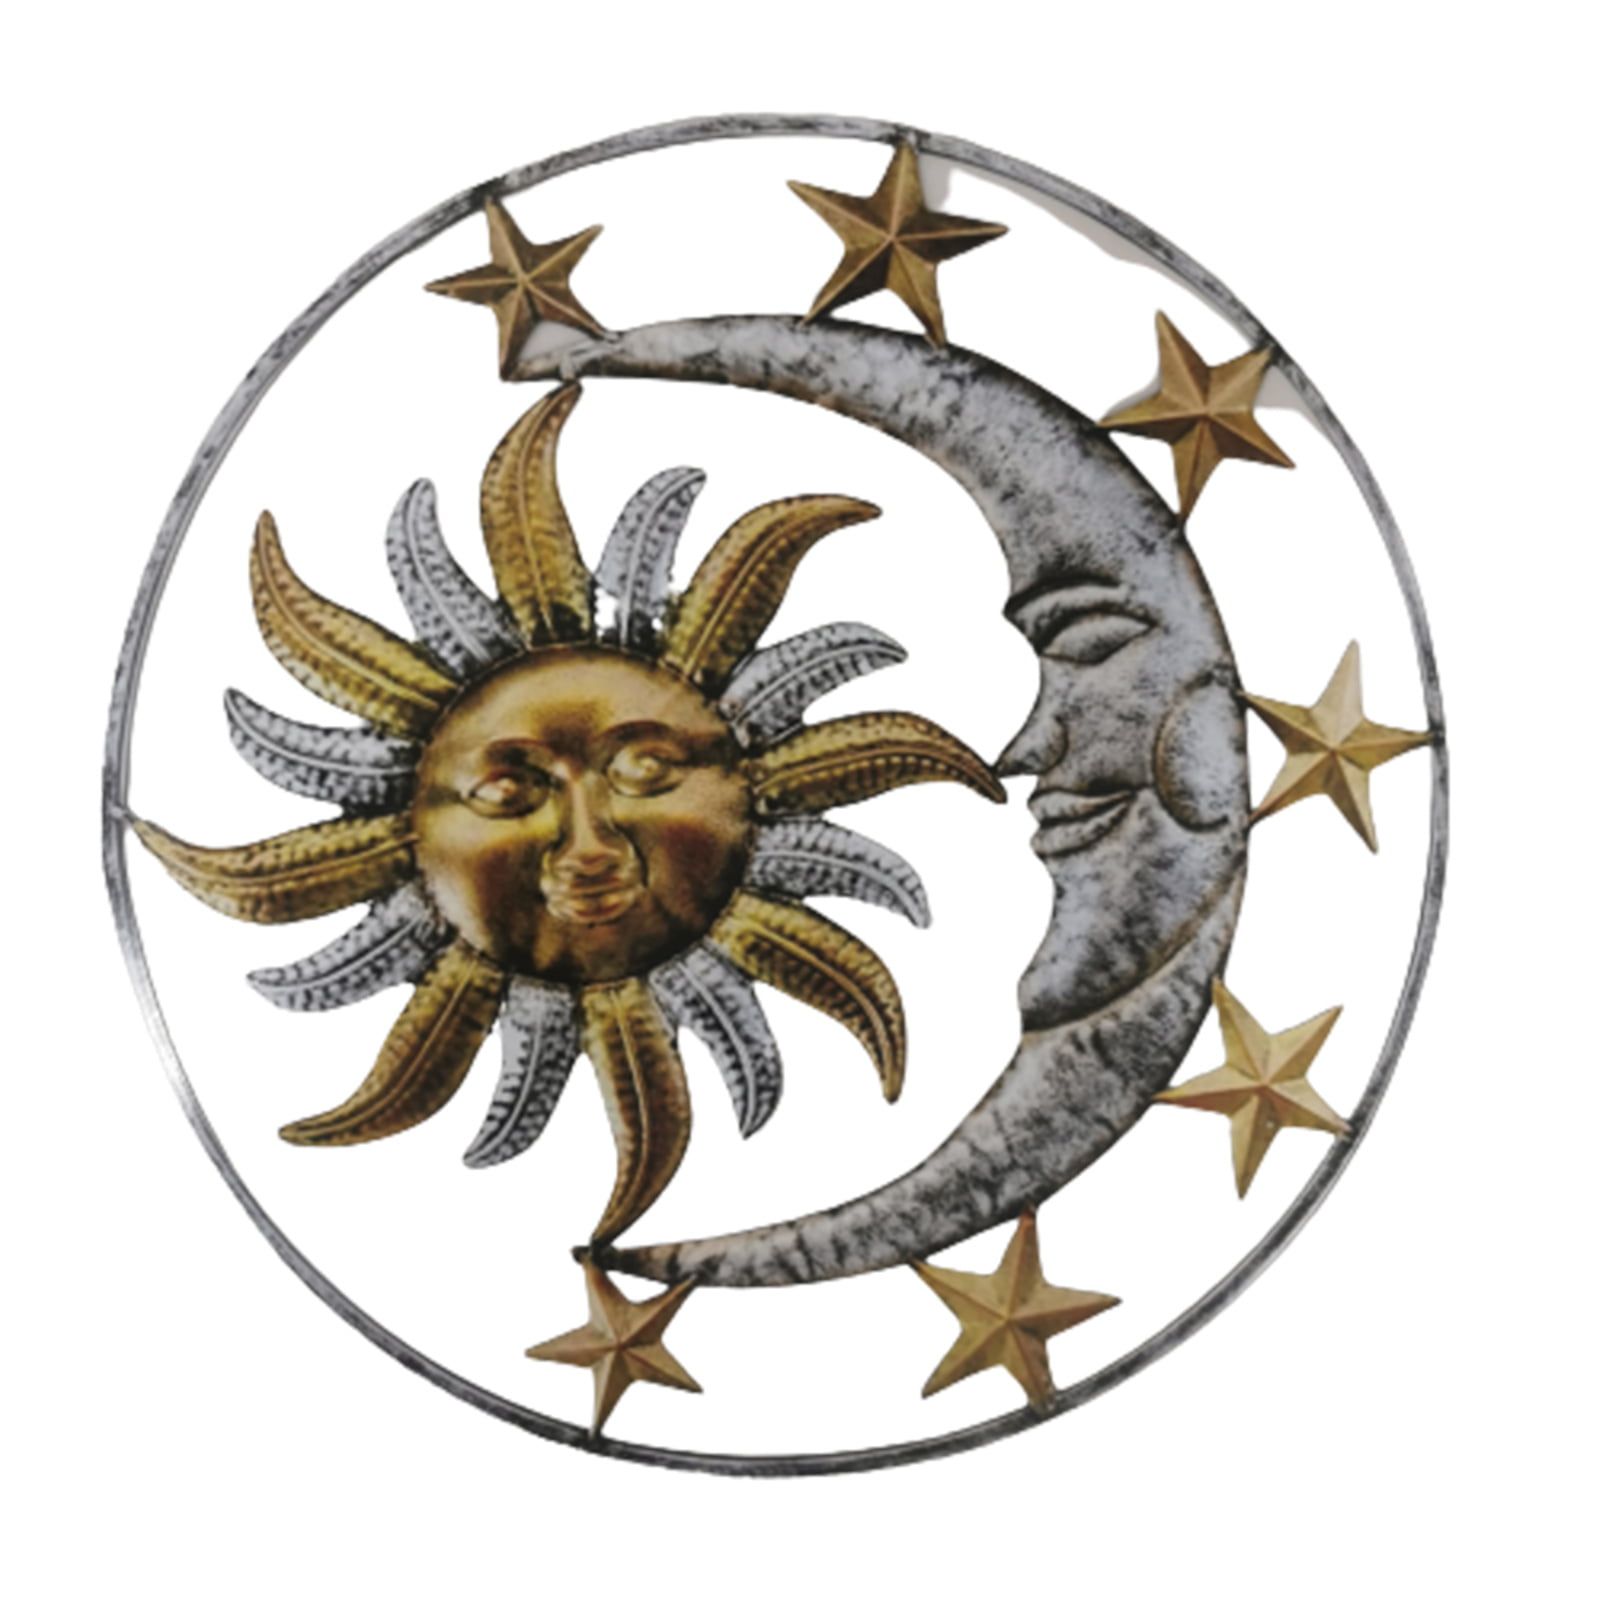 Metal Wall Art Decoration Creative Sun Moon Star Statue Hanging Ornament  For Home Living Room Garden – Walmart Pertaining To 2017 Weather Resistant Metal Wall Art (View 12 of 20)